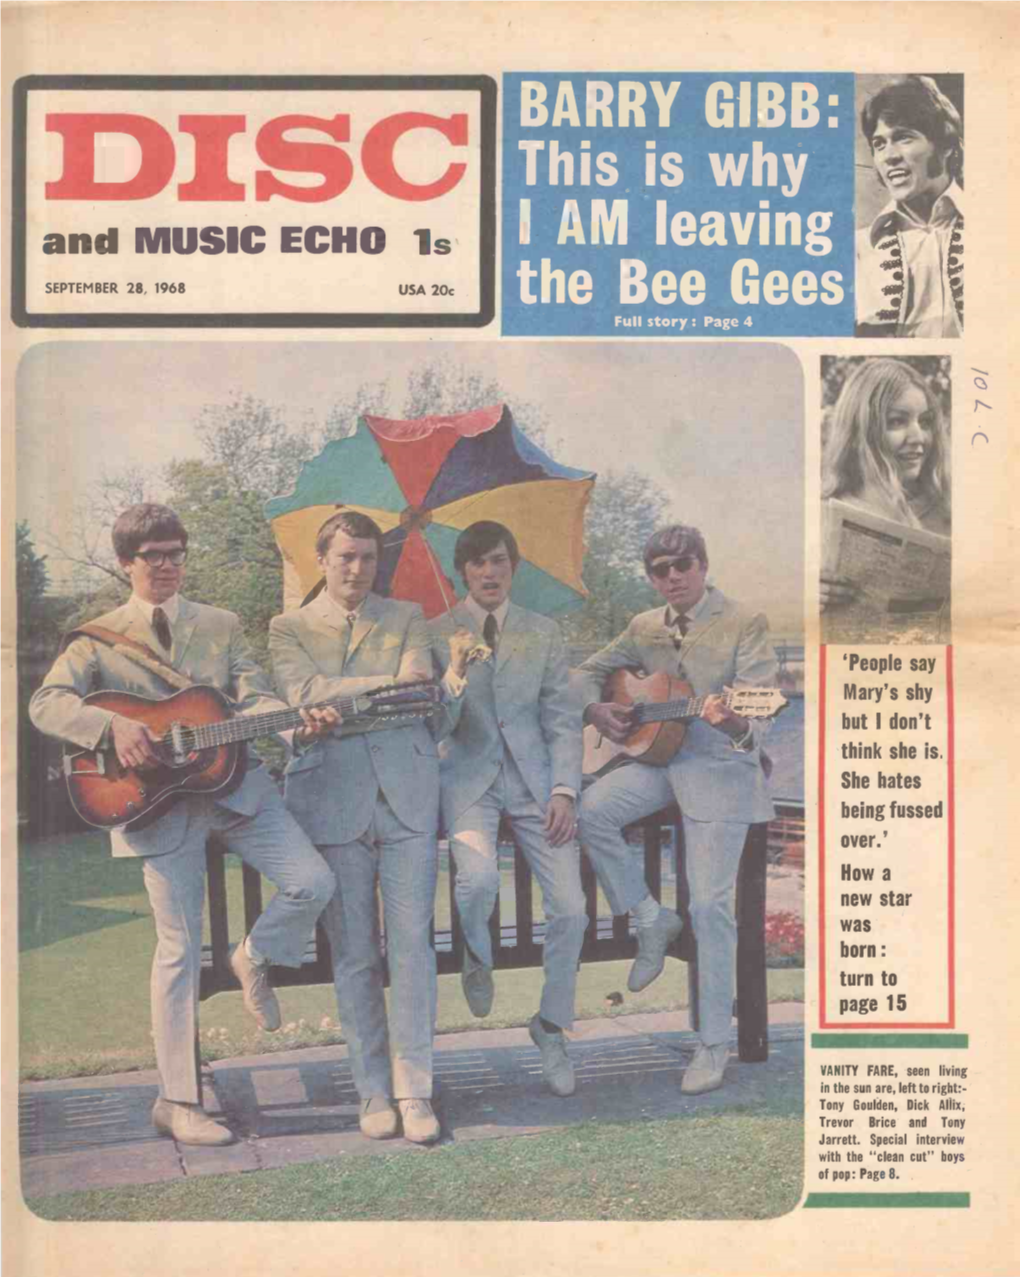 This Is Why and MUSIC Echoisi AM Leaving SEPTEMBER 28, 1968 USA 20C the Bee Gees Full Story : Page 4